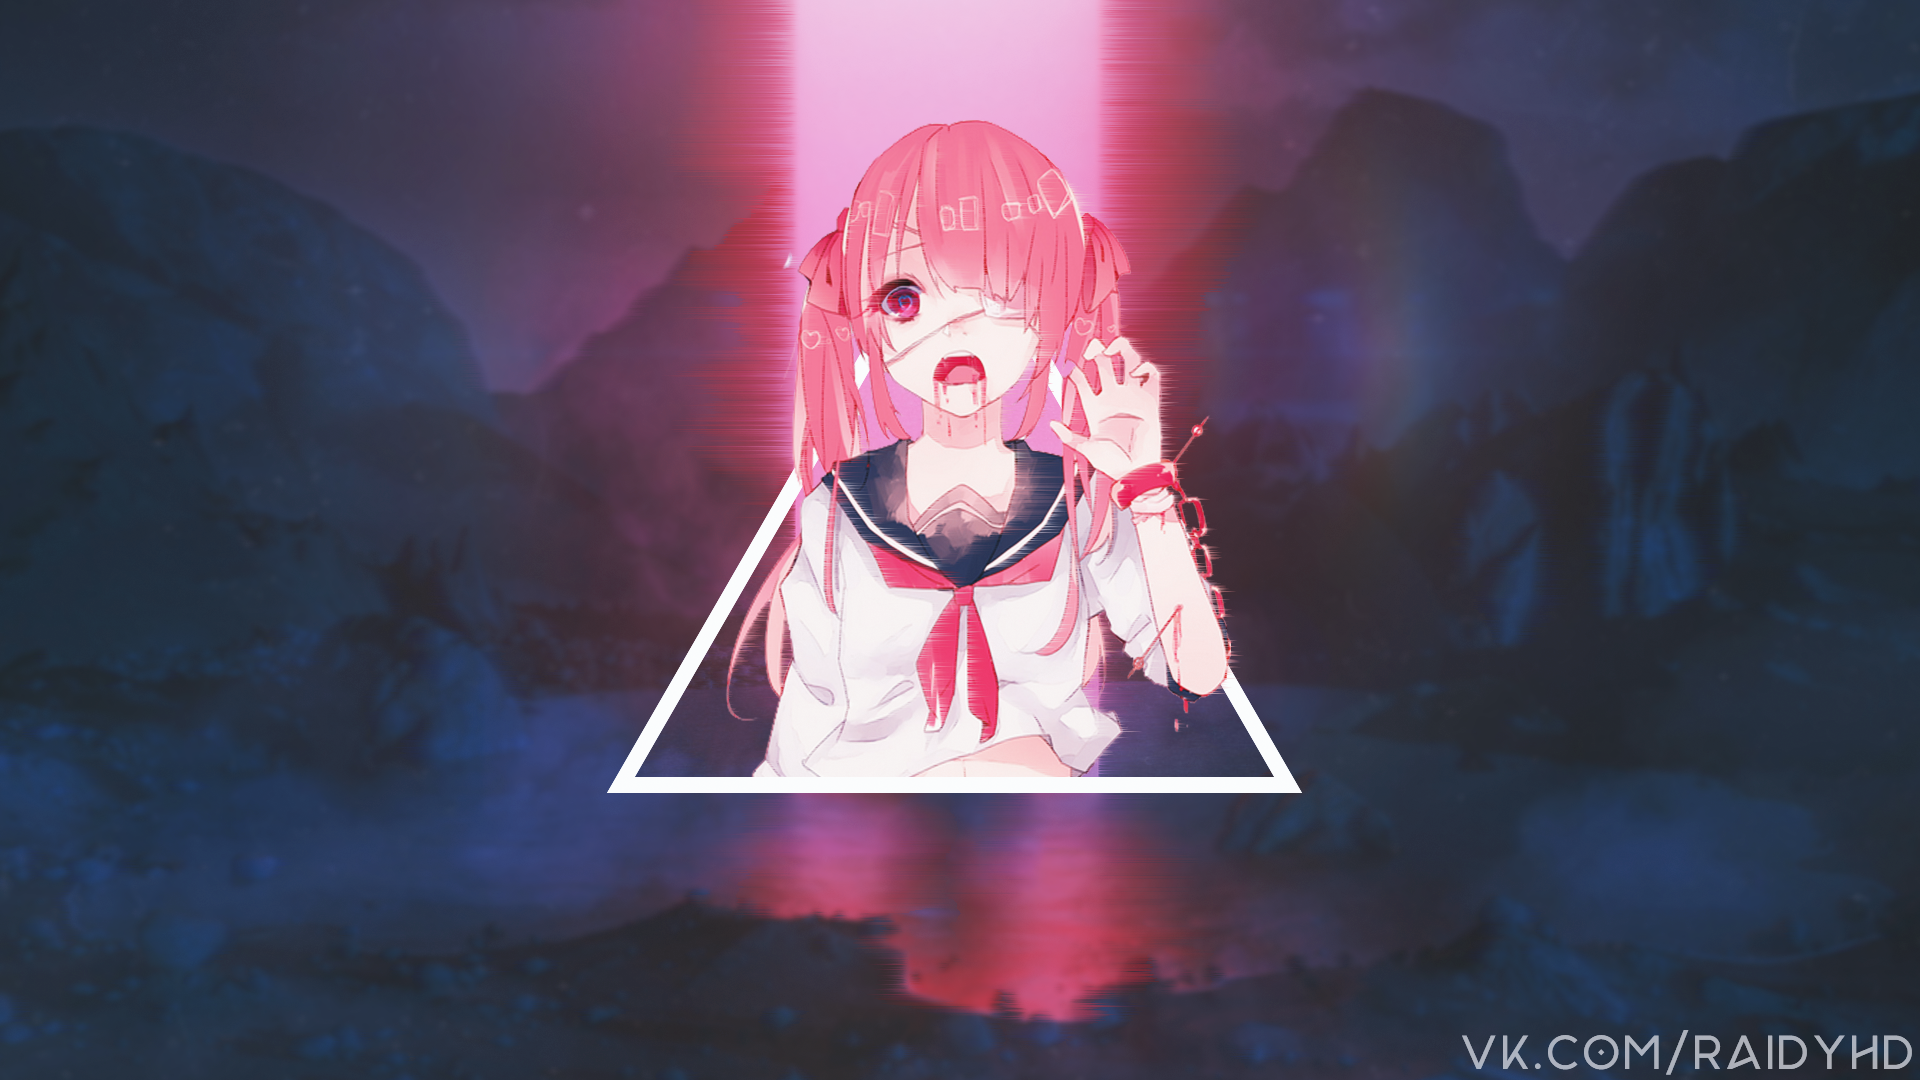 Anime 1920x1080 anime anime girls glitch art picture-in-picture